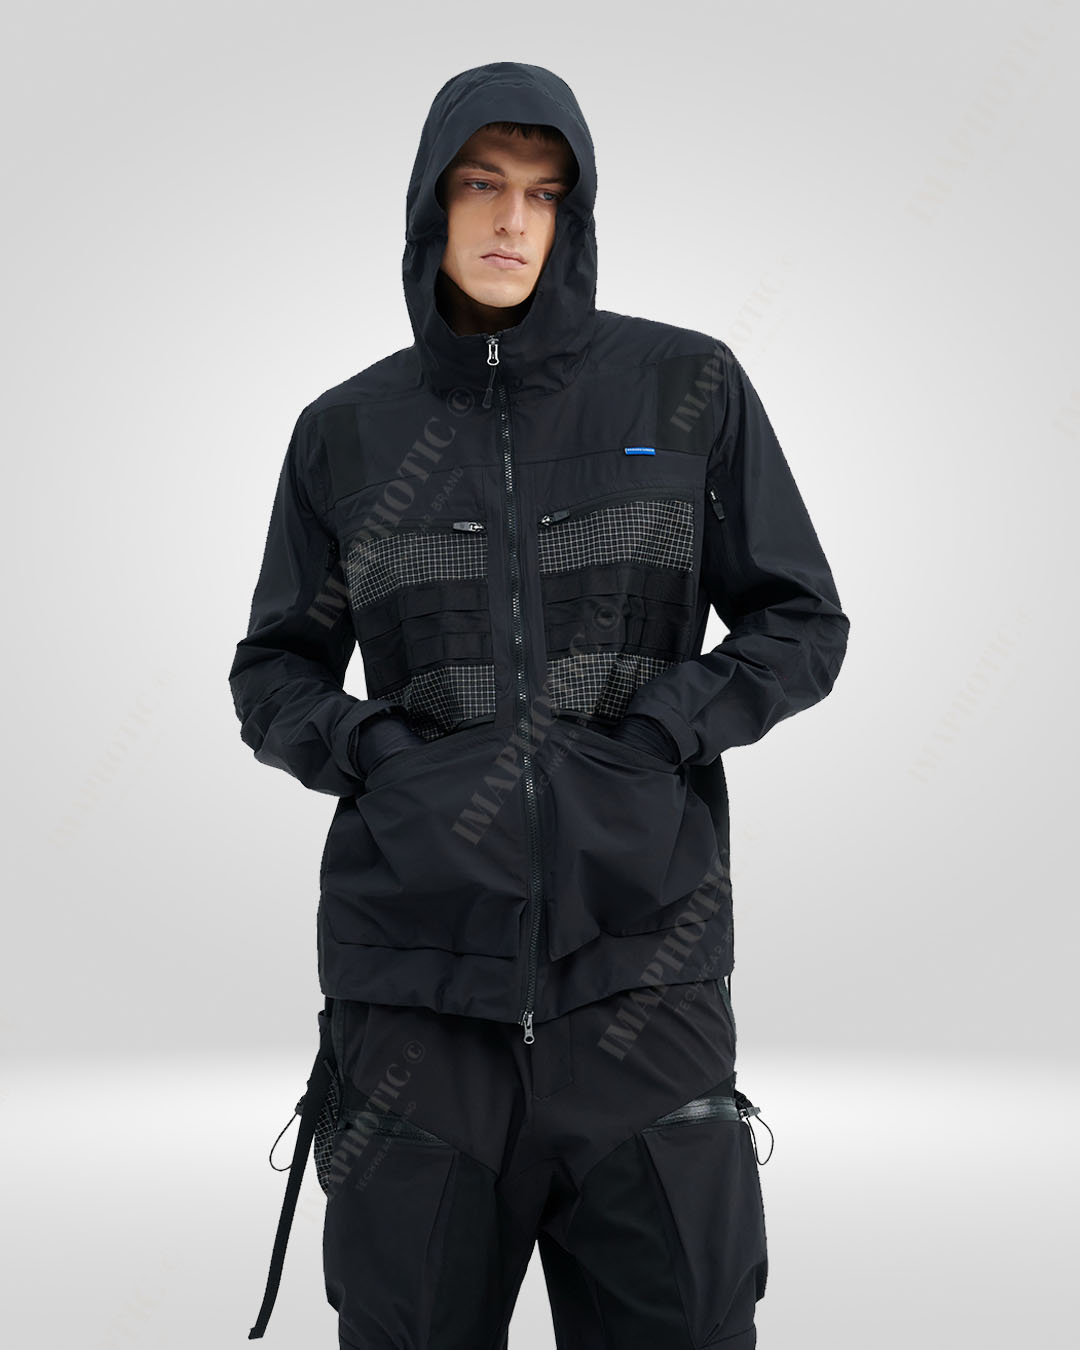 Adventurer\'s Hooded Outdoor Jacket Defy in Style Elements the - Imaphotic –